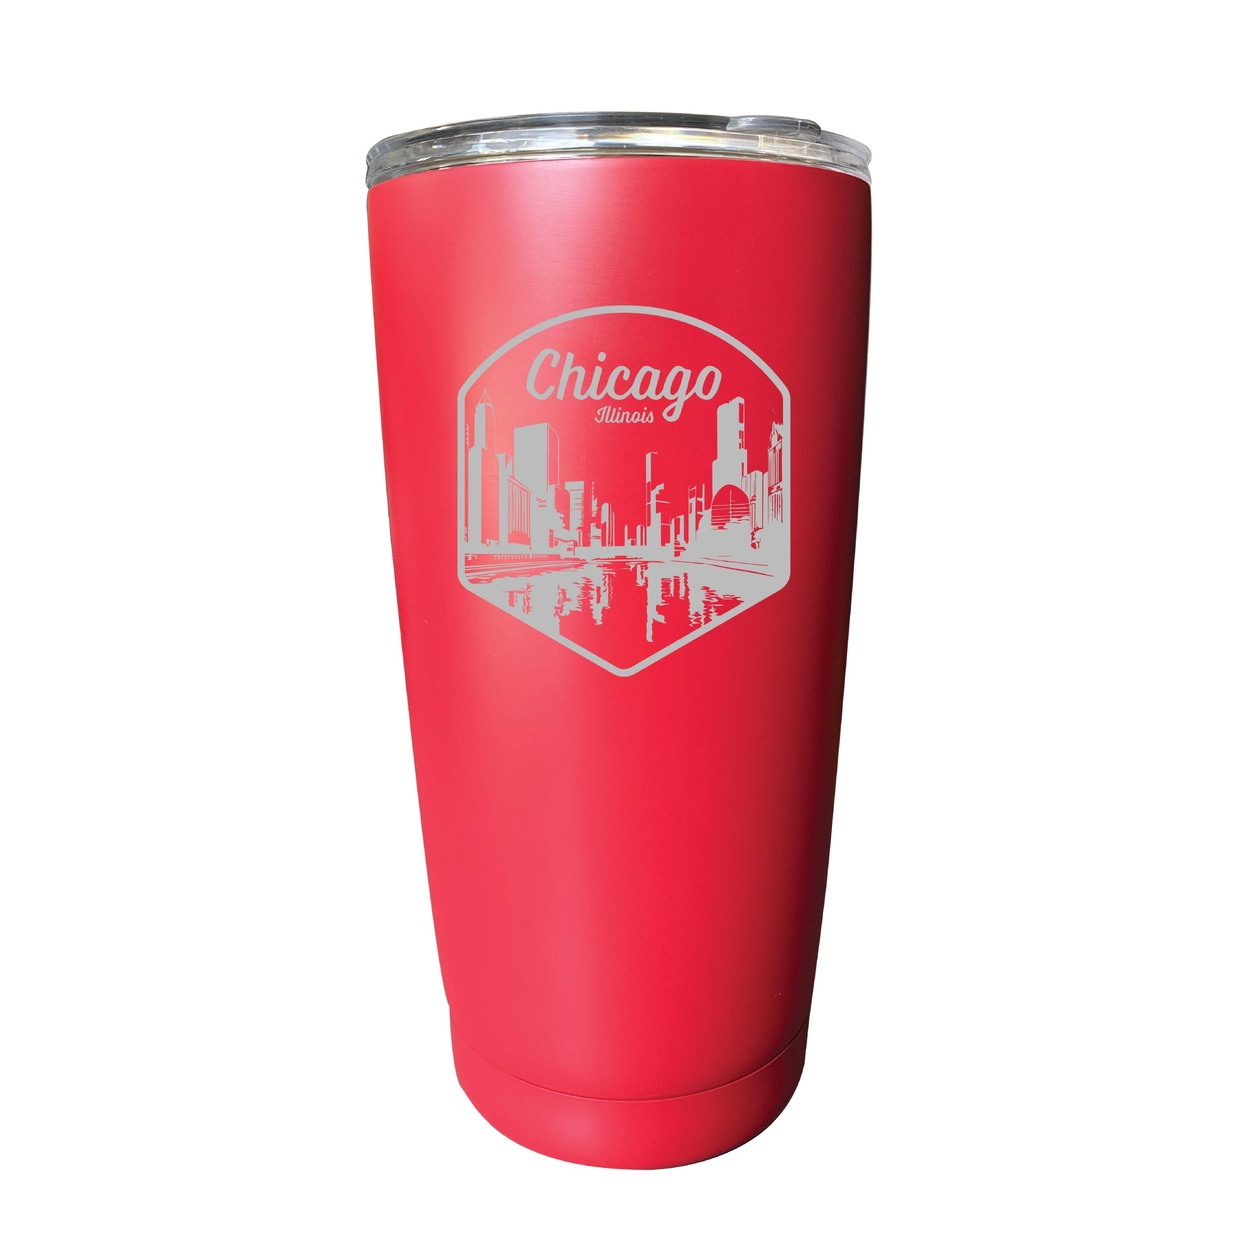 Chicago Illinois Souvenir 16 Oz Engraved Insulated Tumbler - Red,,2-Pack